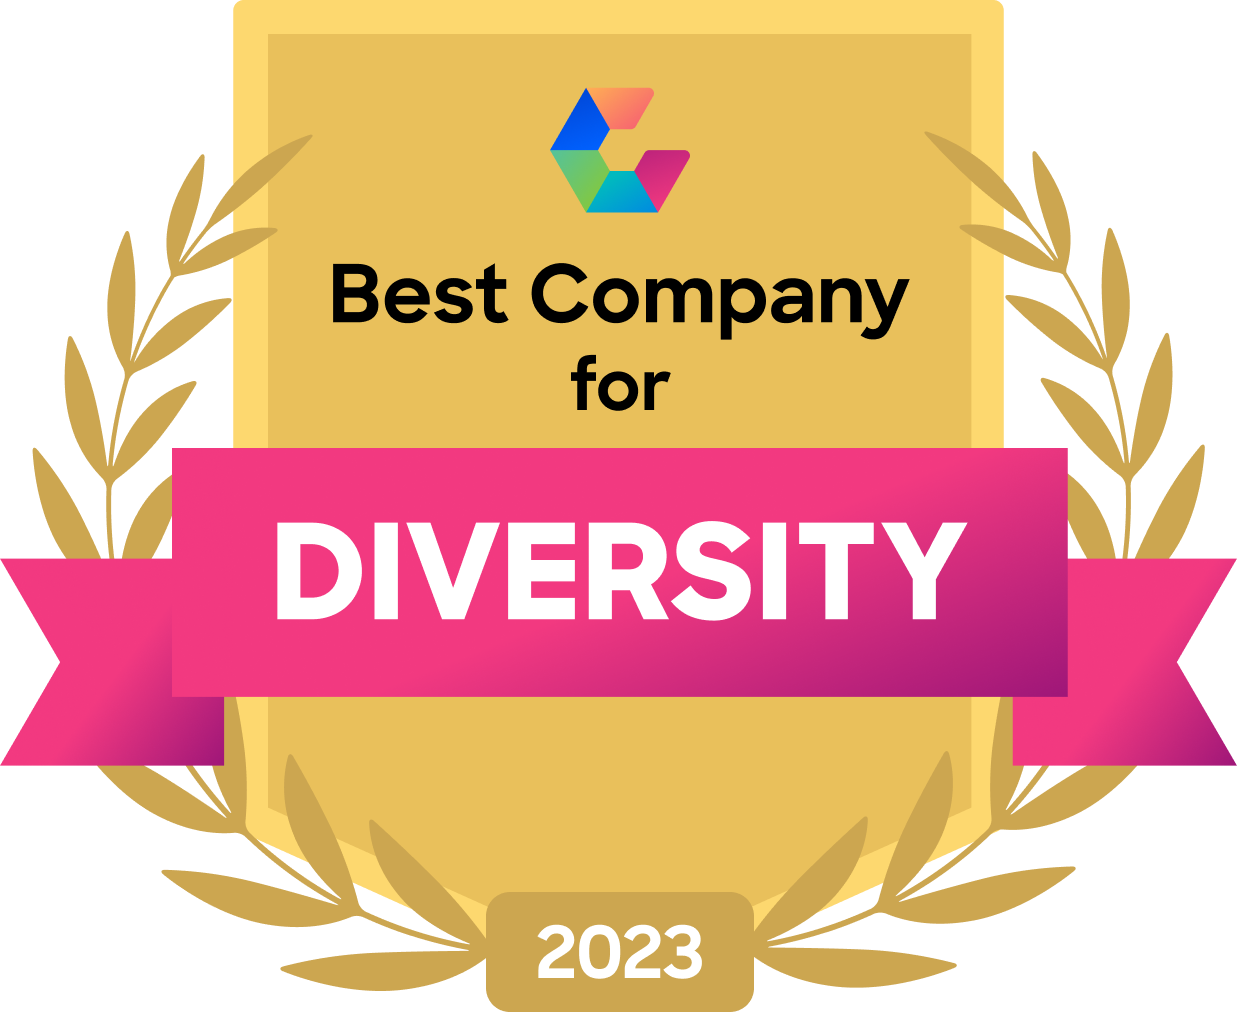 Best Company for Diversity 2023